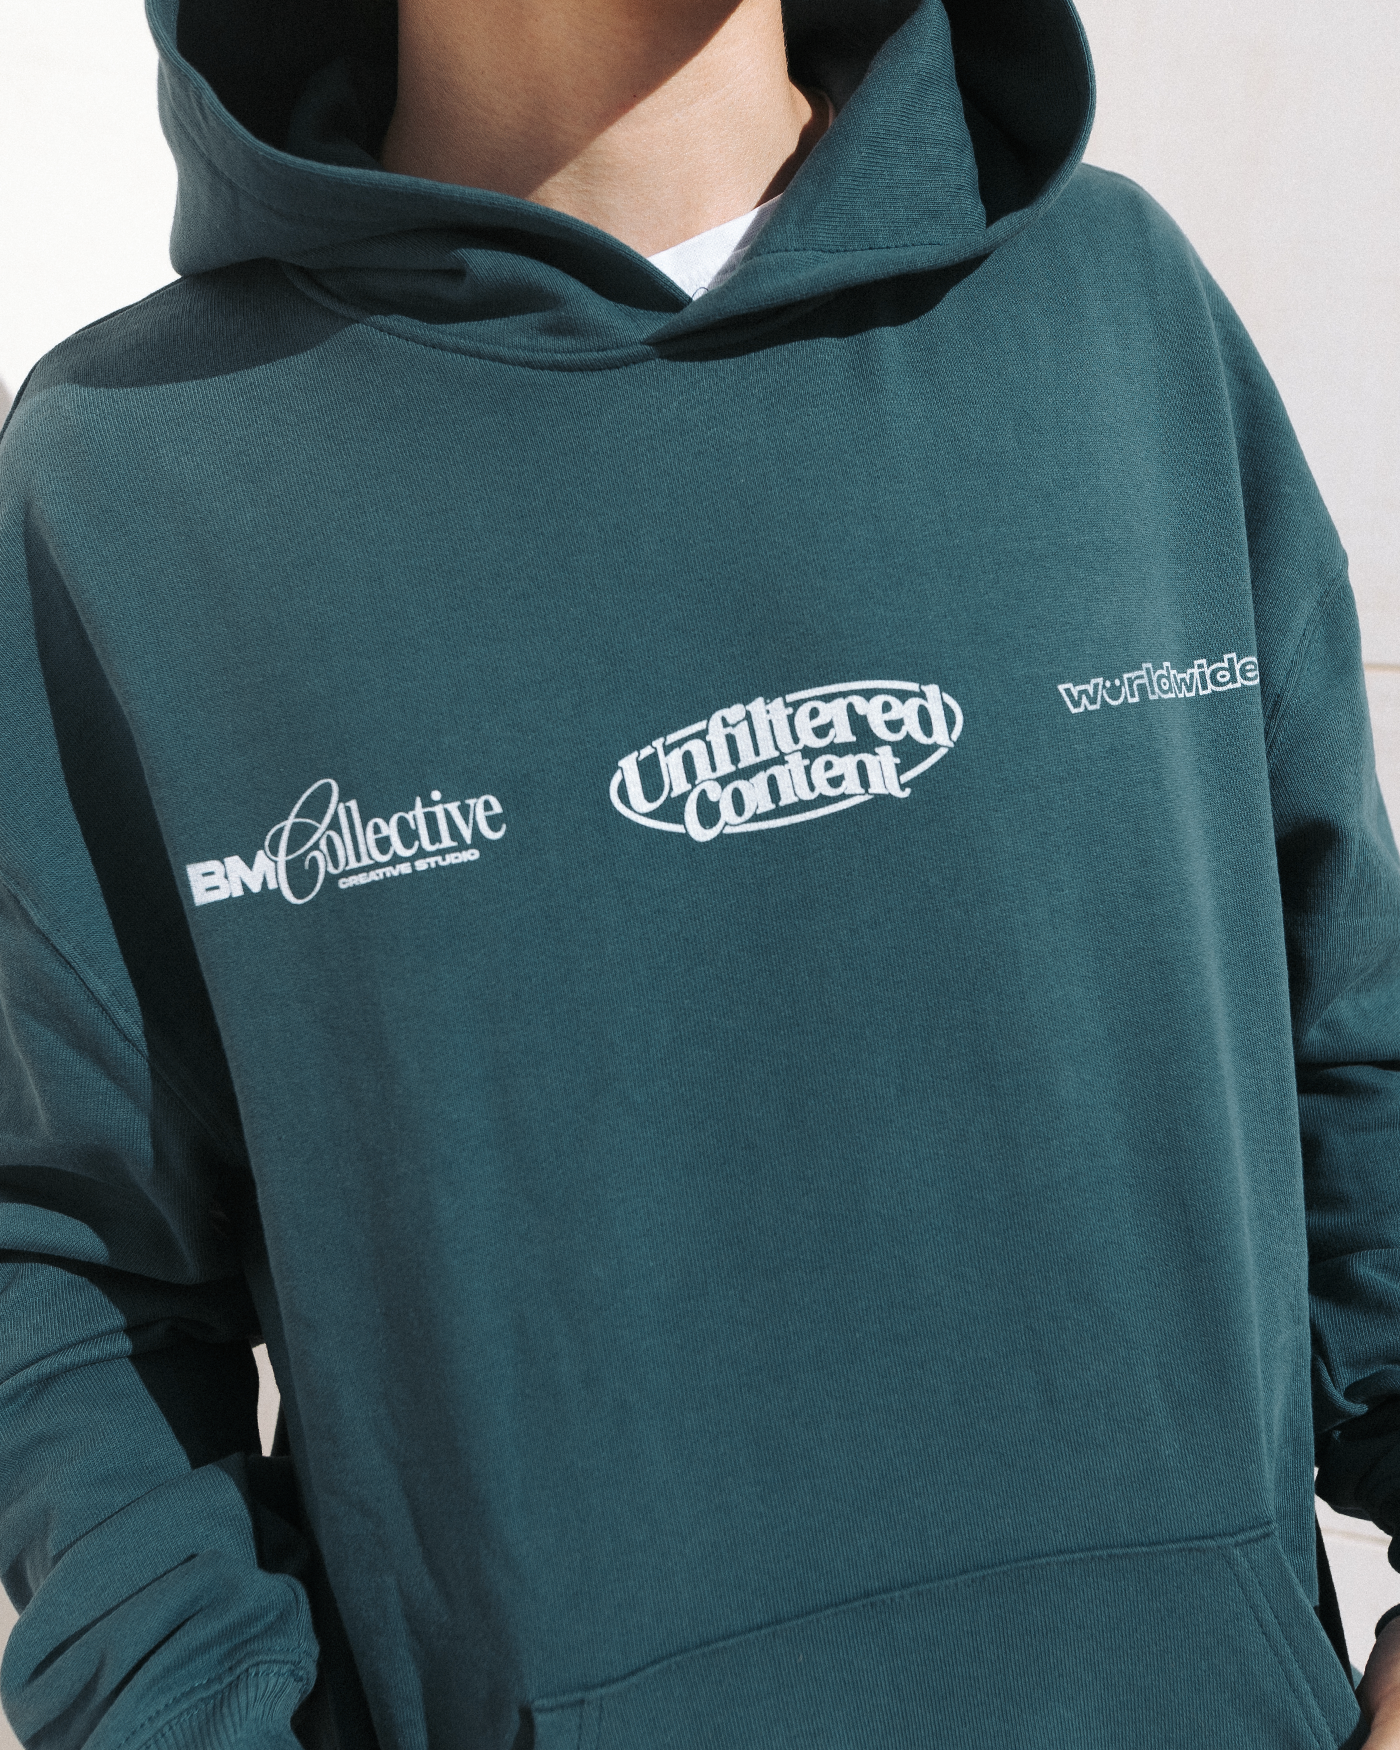 Collective Stg Hoodie